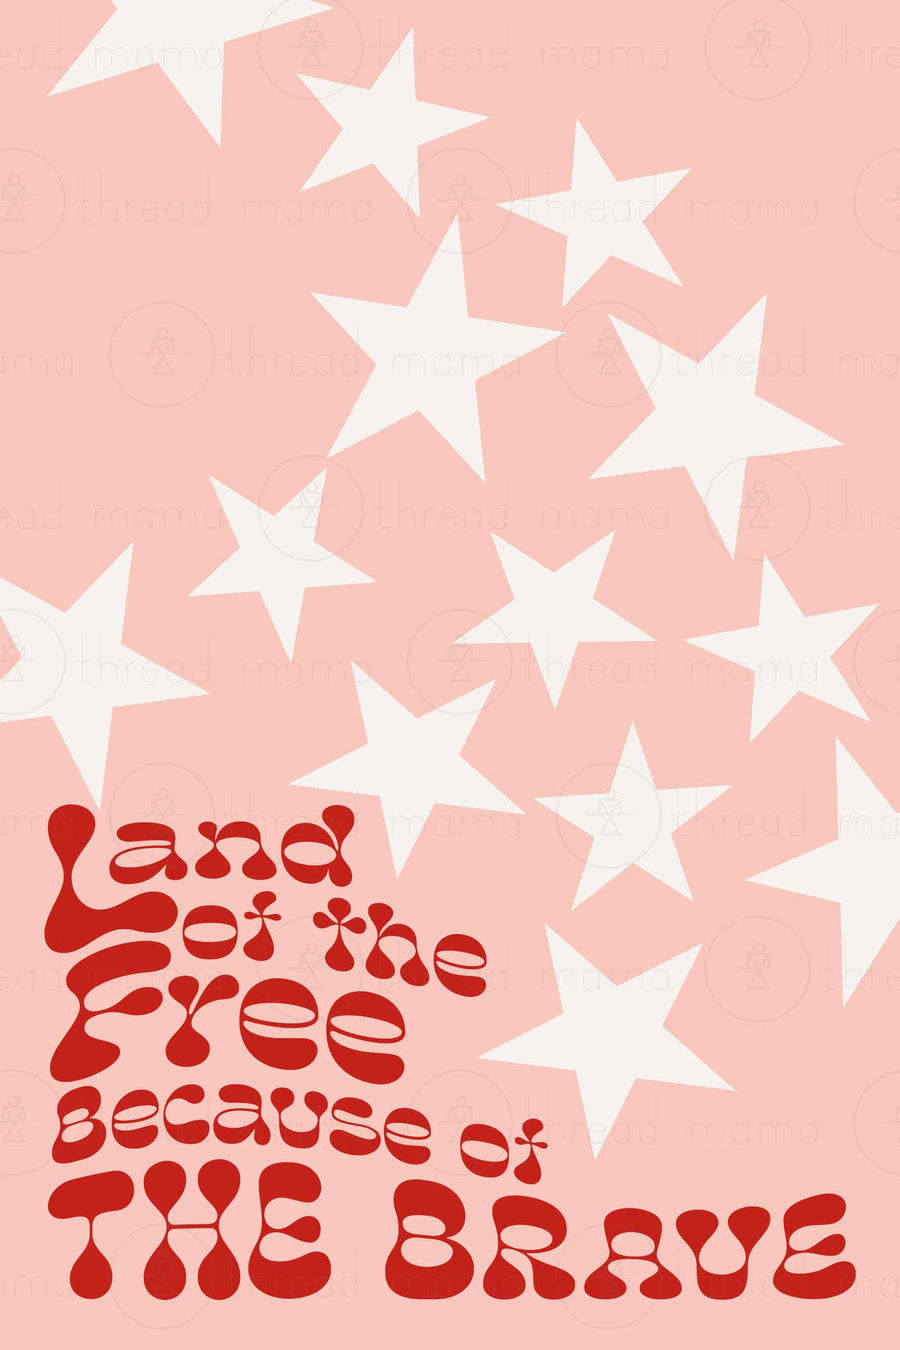 Land of the Free (Vol.2)